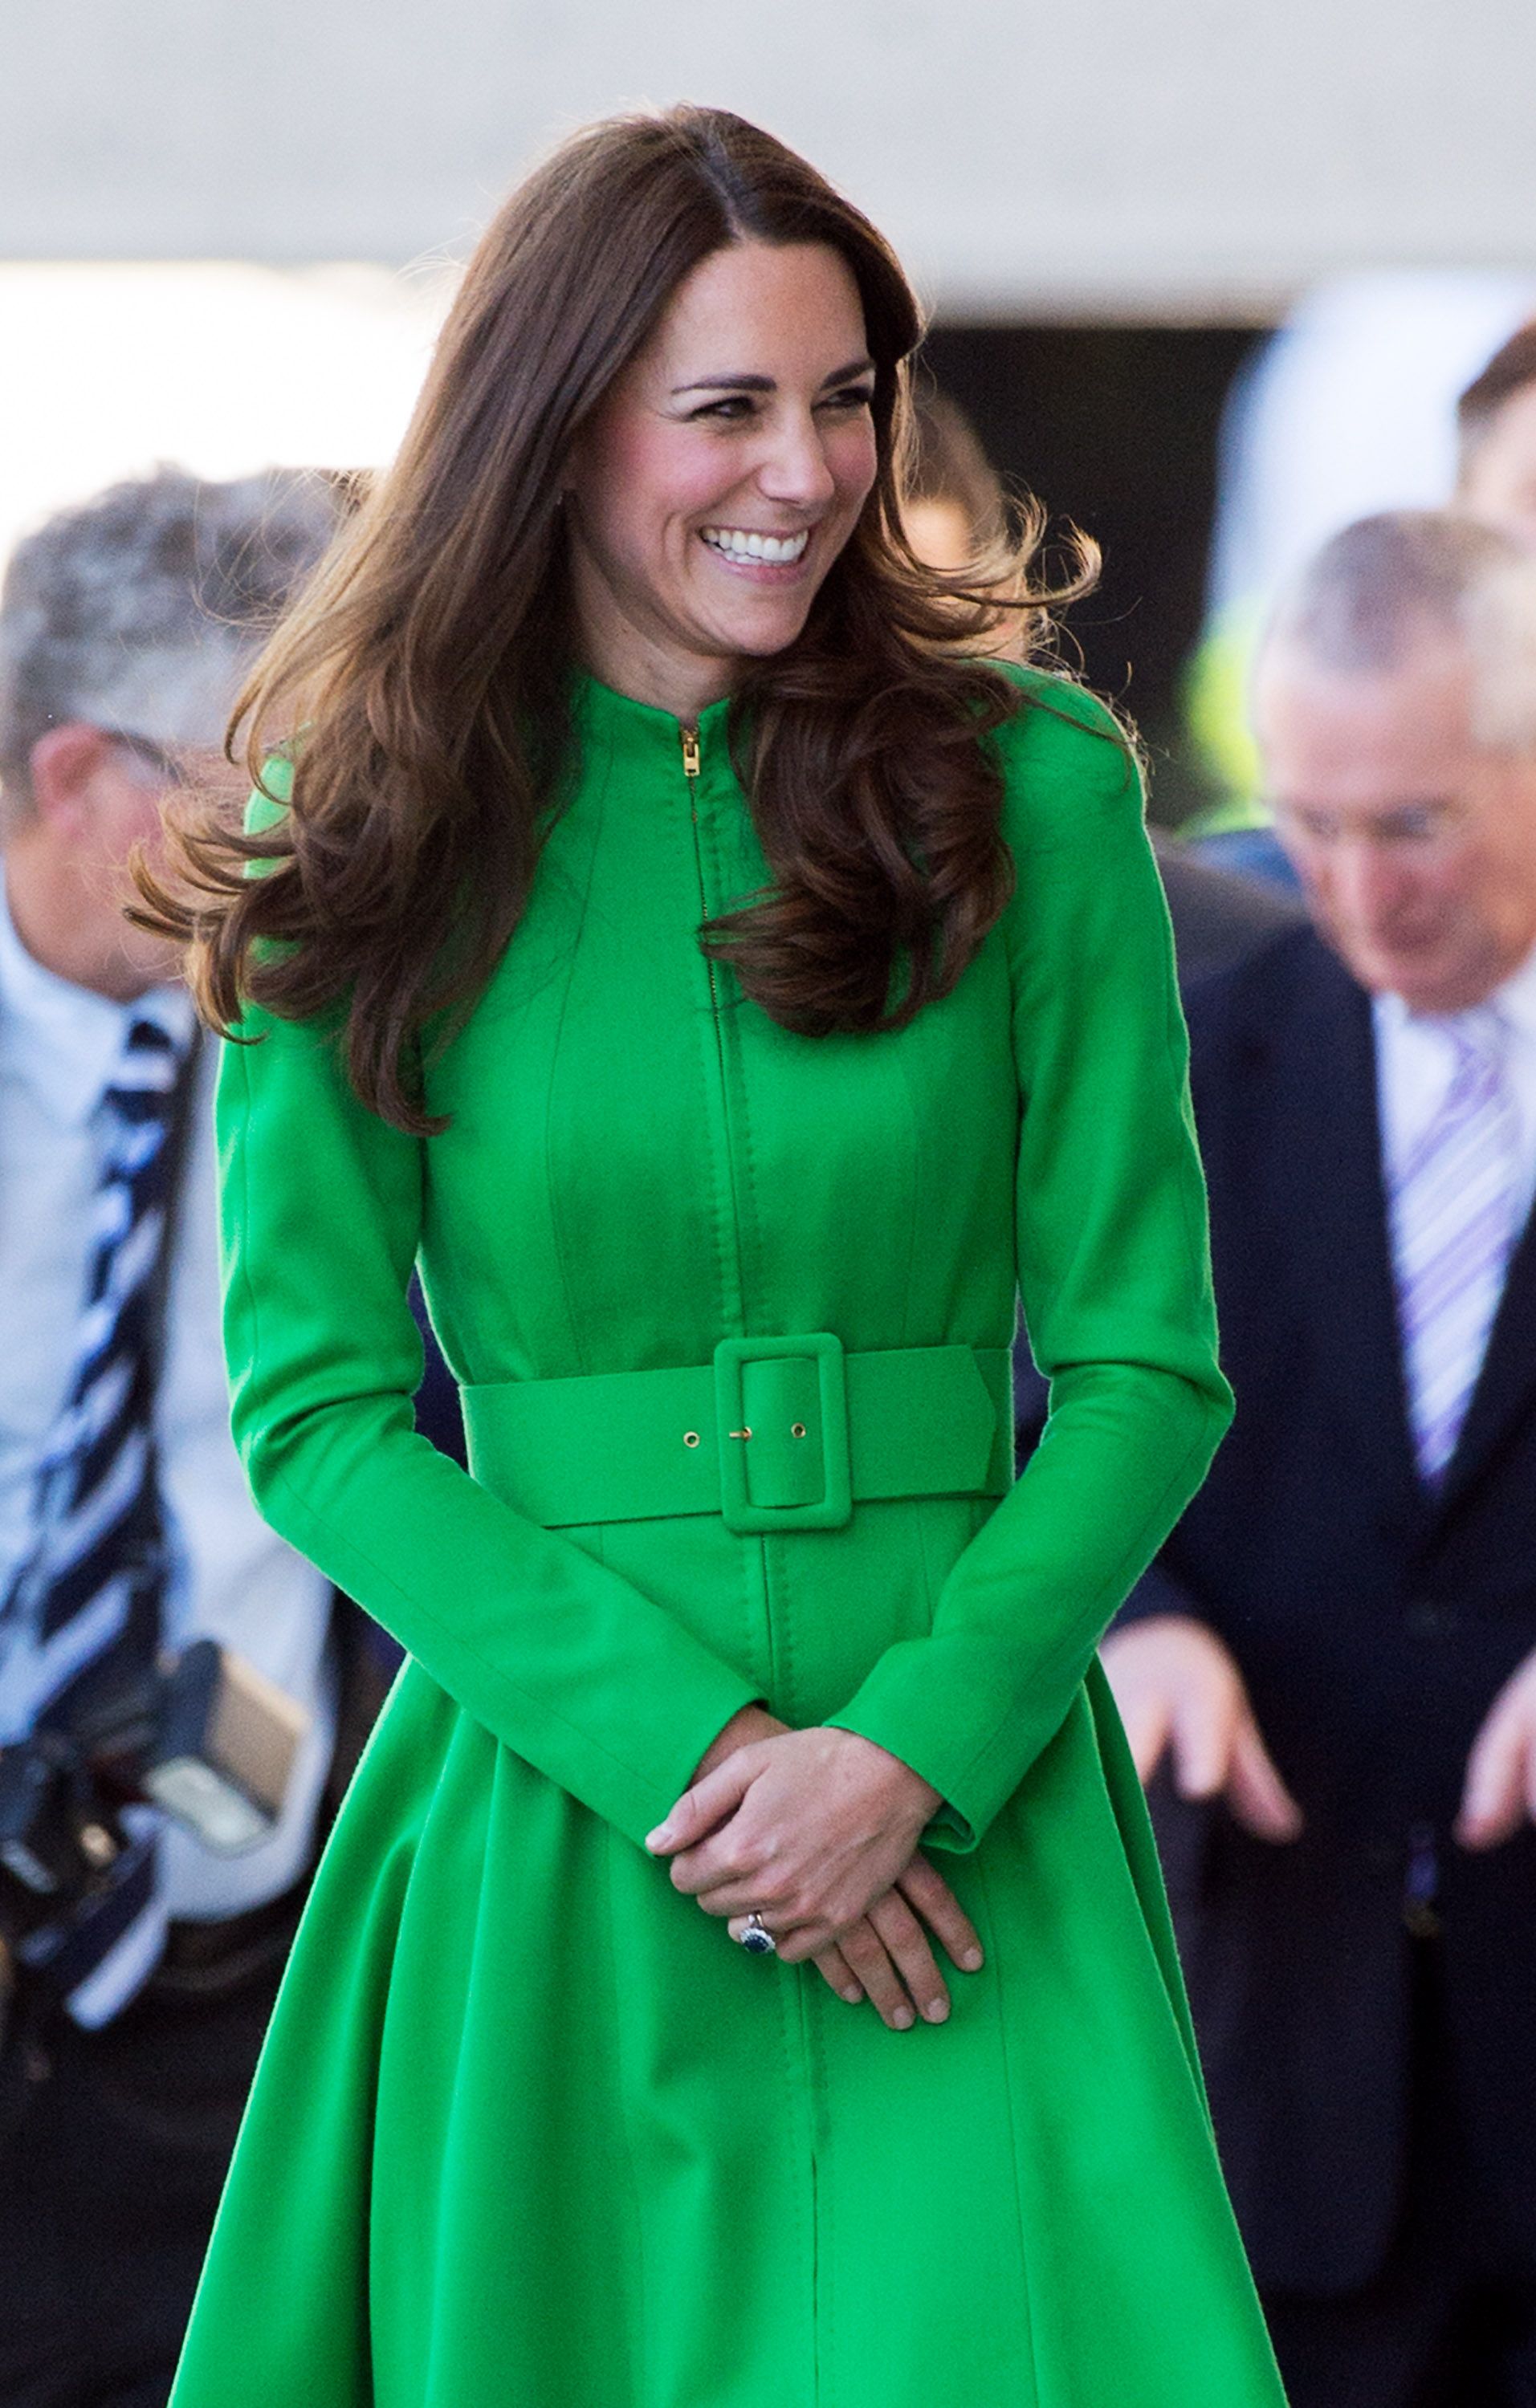 Kate Middleton the Duchess of Cambridge visits the National Portrait Gallery on April 24, 2014. | Photo: Getty Images